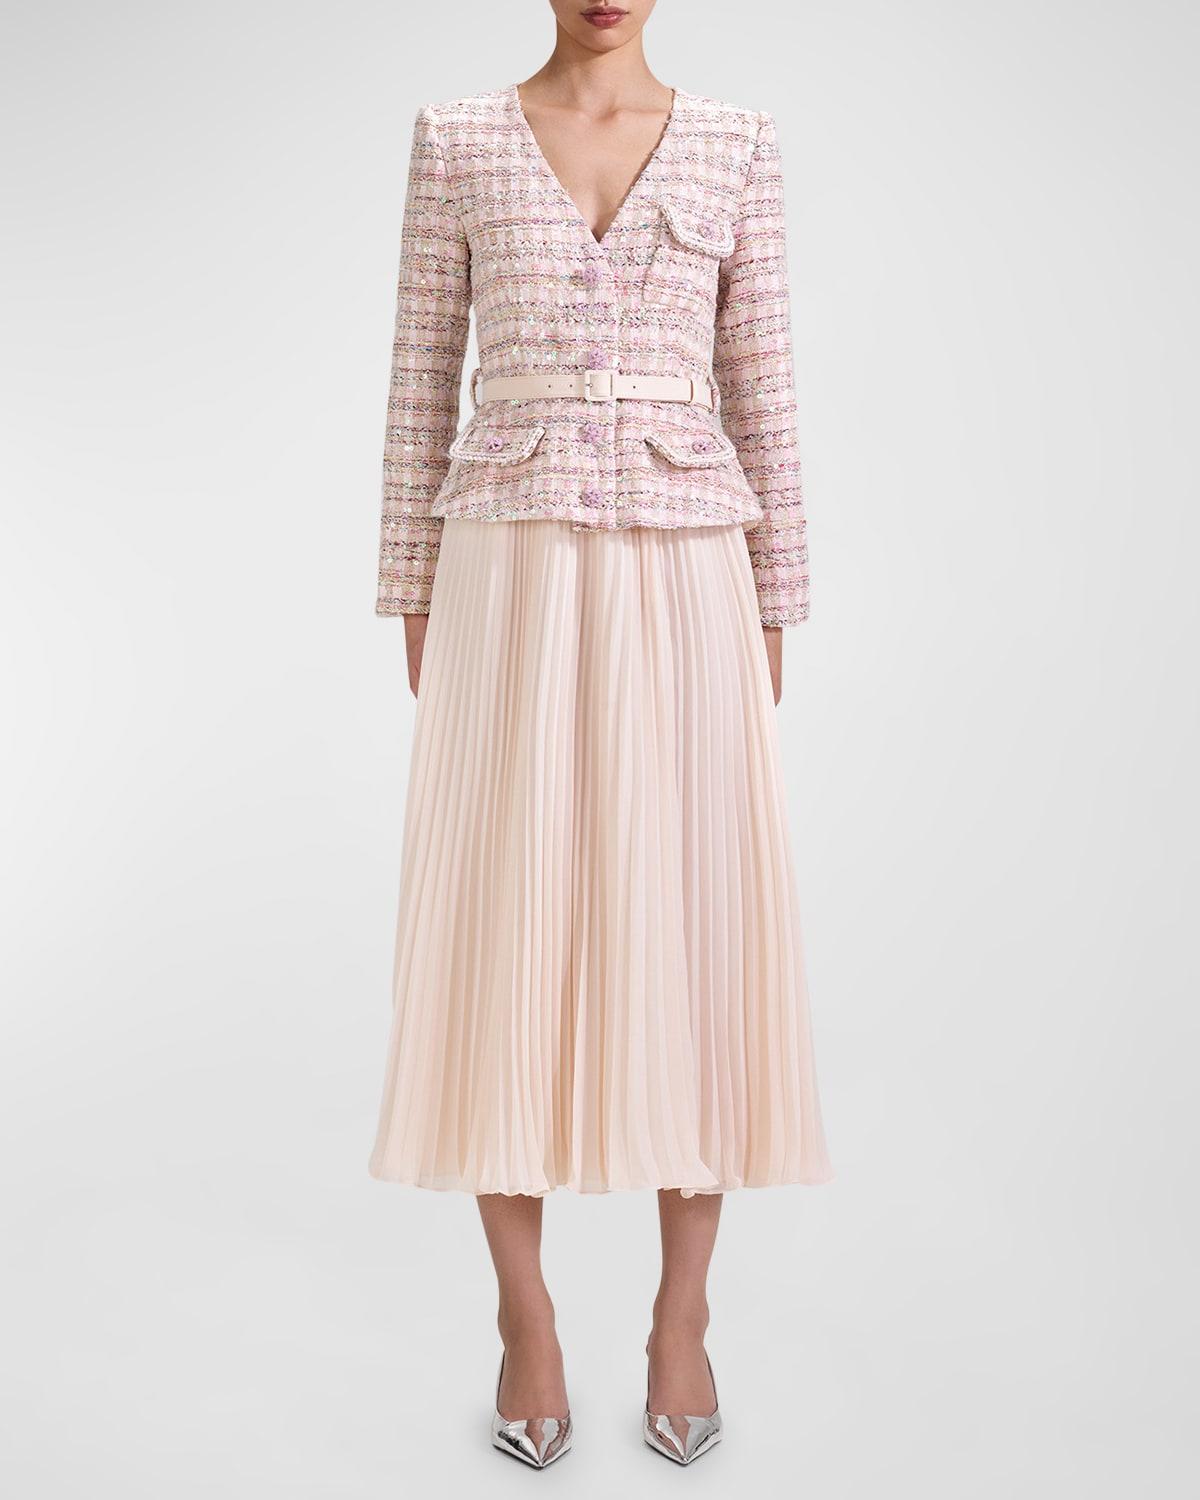 Self-Portrait Sequin Bouclé Suiting & Chiffon Belted Combo Midi Dress in  Pink